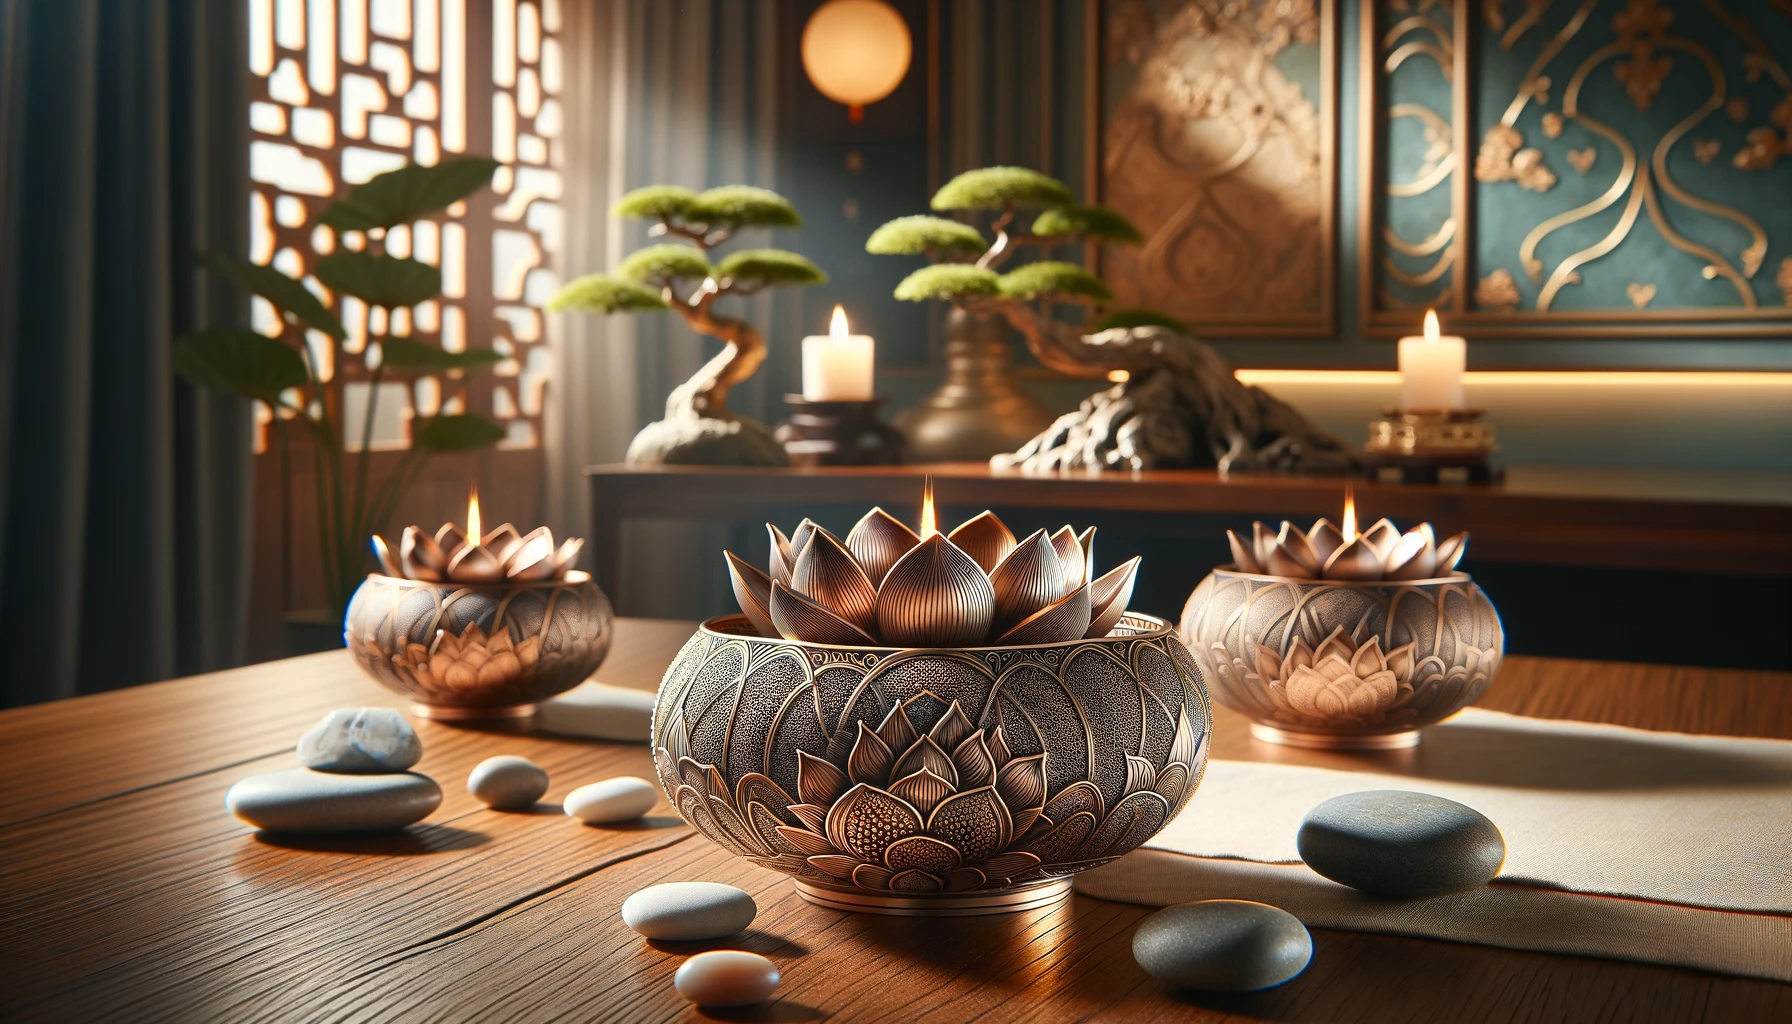 A room featuring intricately designed lotus-embossed incense holders on a polished wooden surface. The holders are surrounded by smooth pebbles, a small bonsai tree, and scattered lotus petals. Soft lighting enhances the tranquil and sophisticated ambiance.